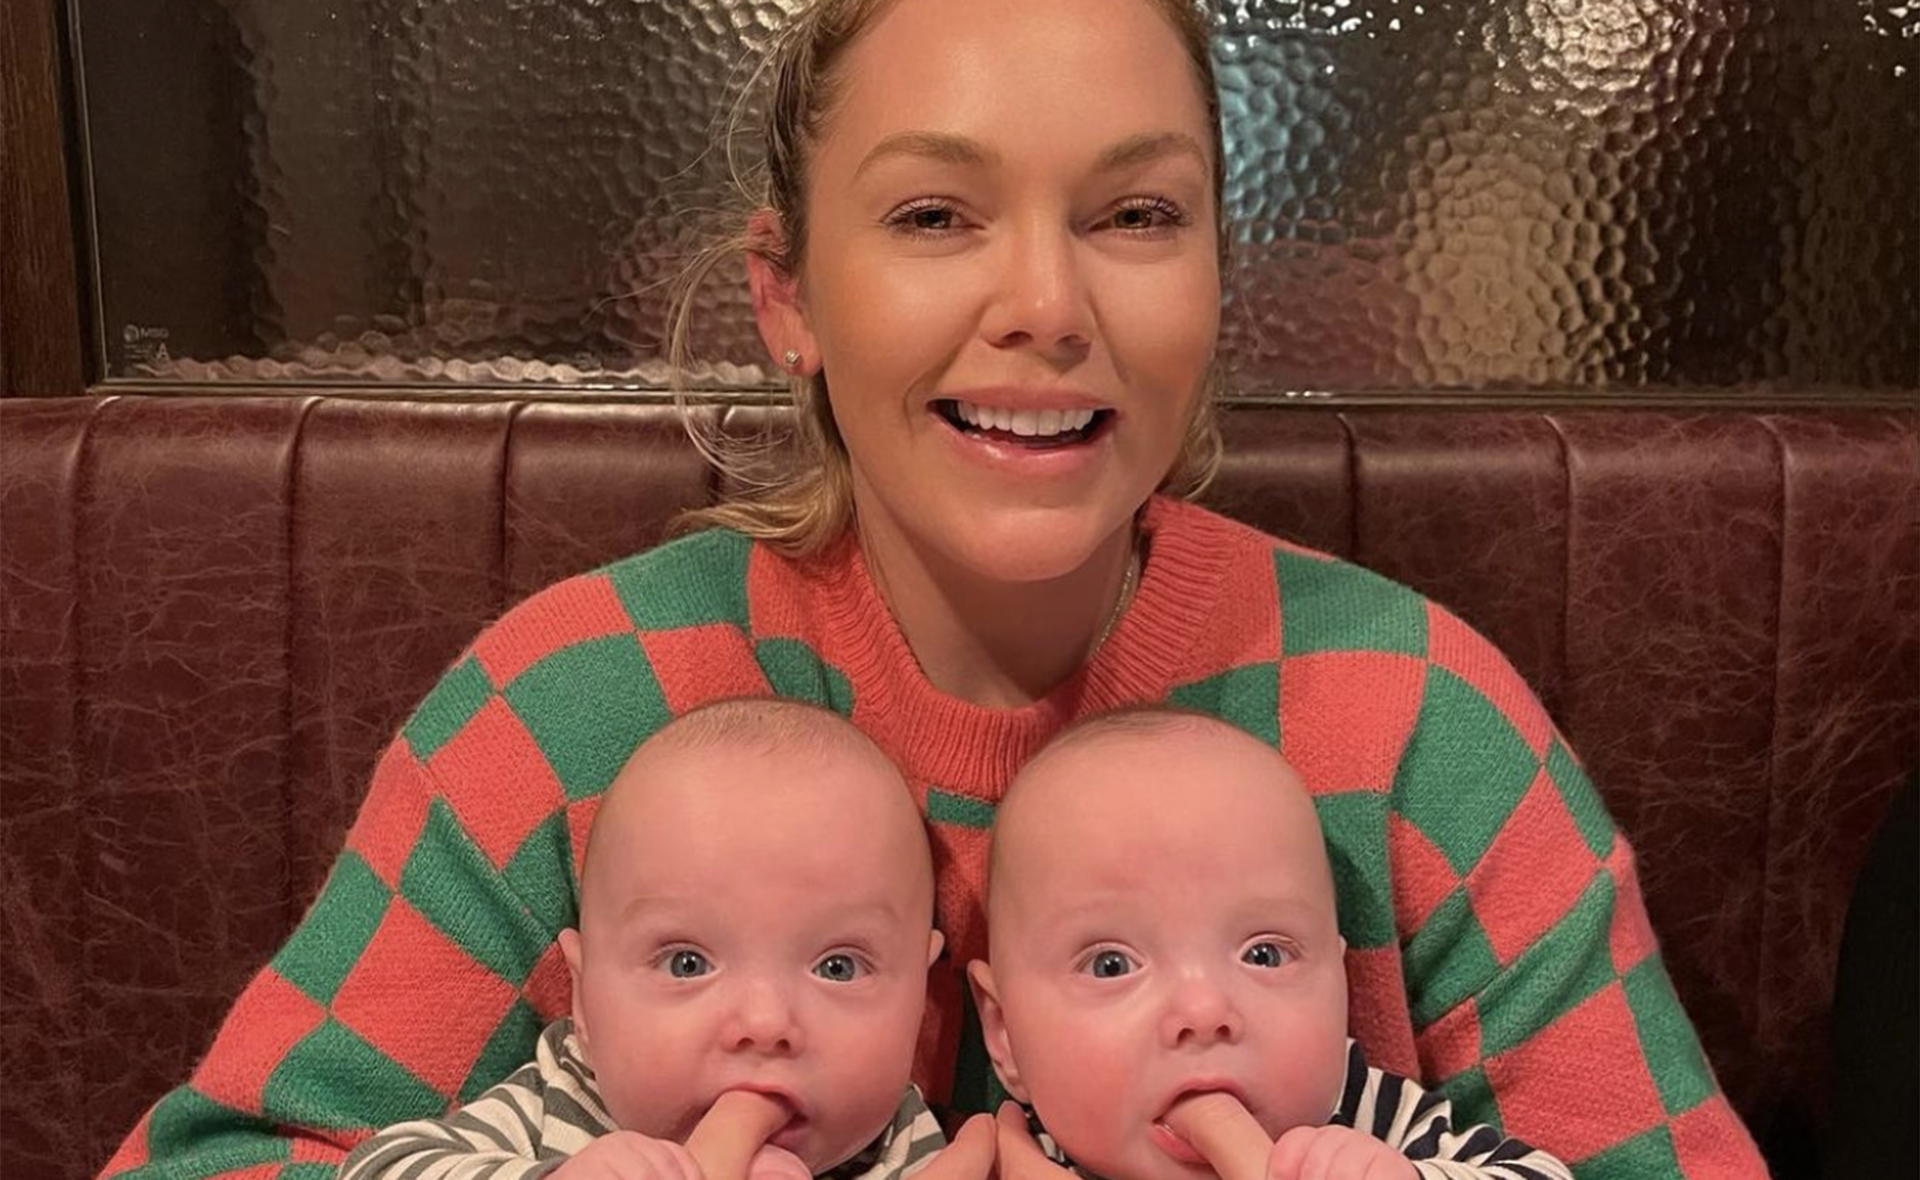 MAFS’ Melissa Rawson reveals the one remark she hates hearing as a mother of twins